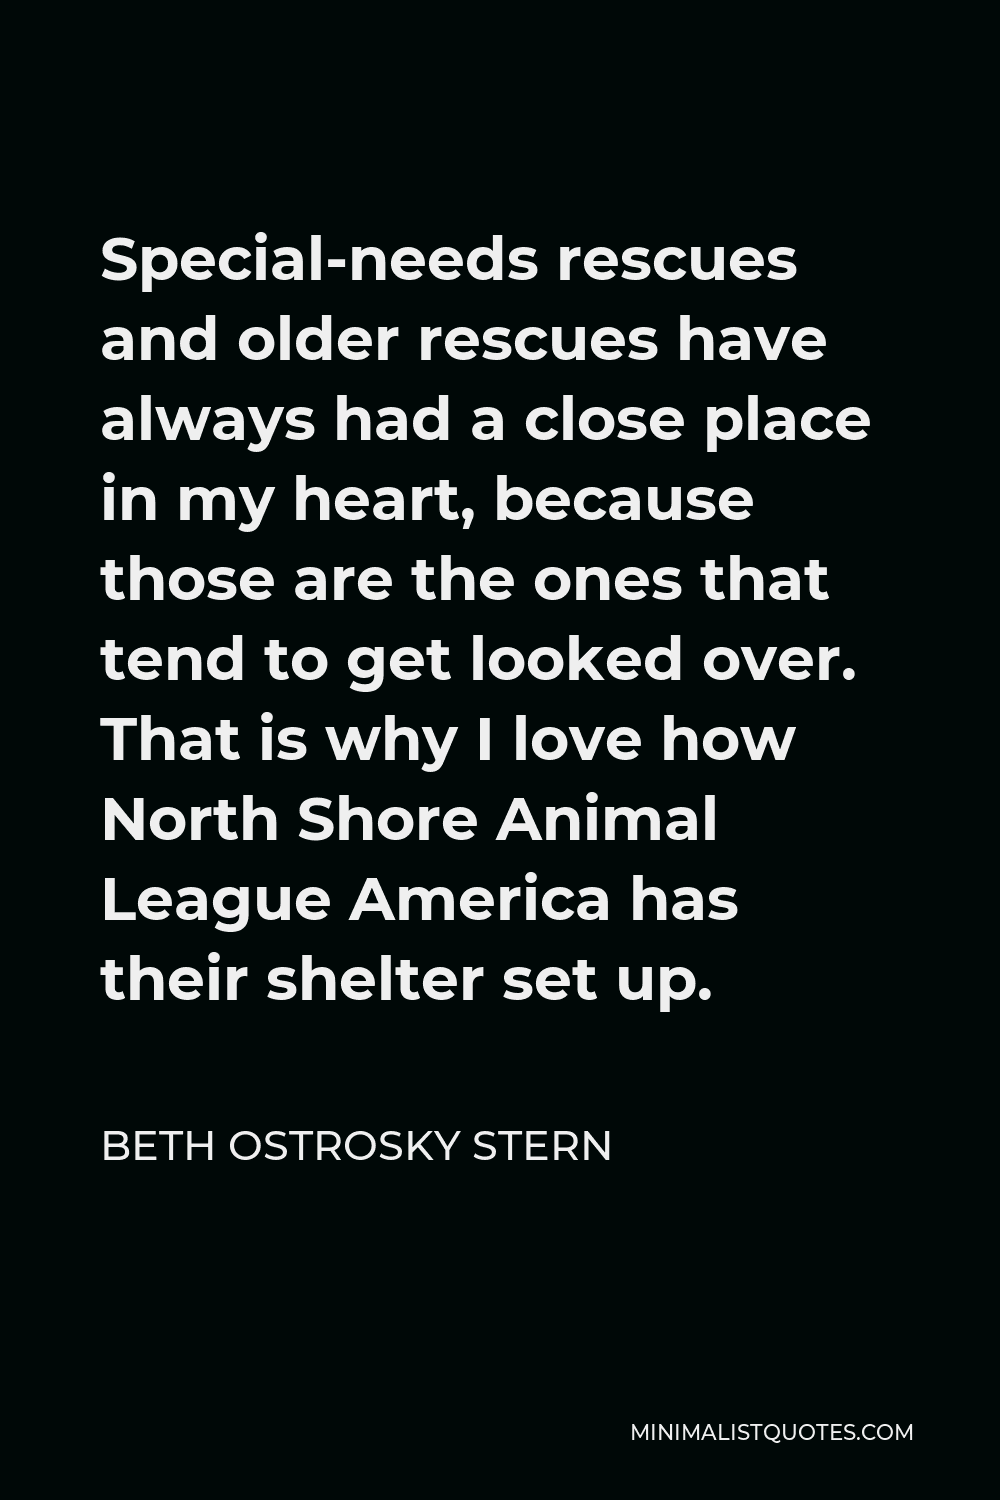 Beth Ostrosky Stern Quote - Special-needs rescues and older rescues have always had a close place in my heart, because those are the ones that tend to get looked over. That is why I love how North Shore Animal League America has their shelter set up.